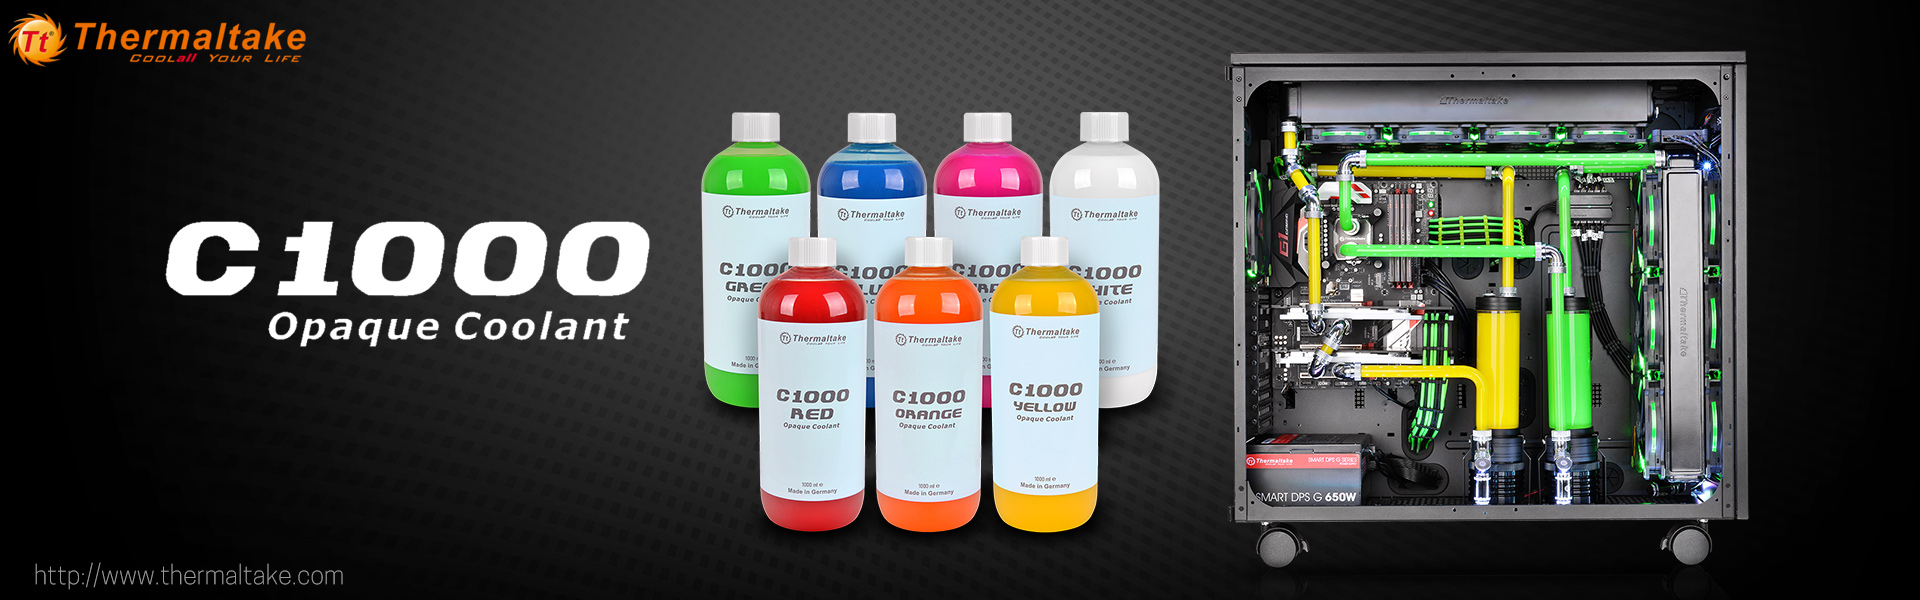 Thermaltake C1000 Opaque Coolant Series- 7 Different Colors